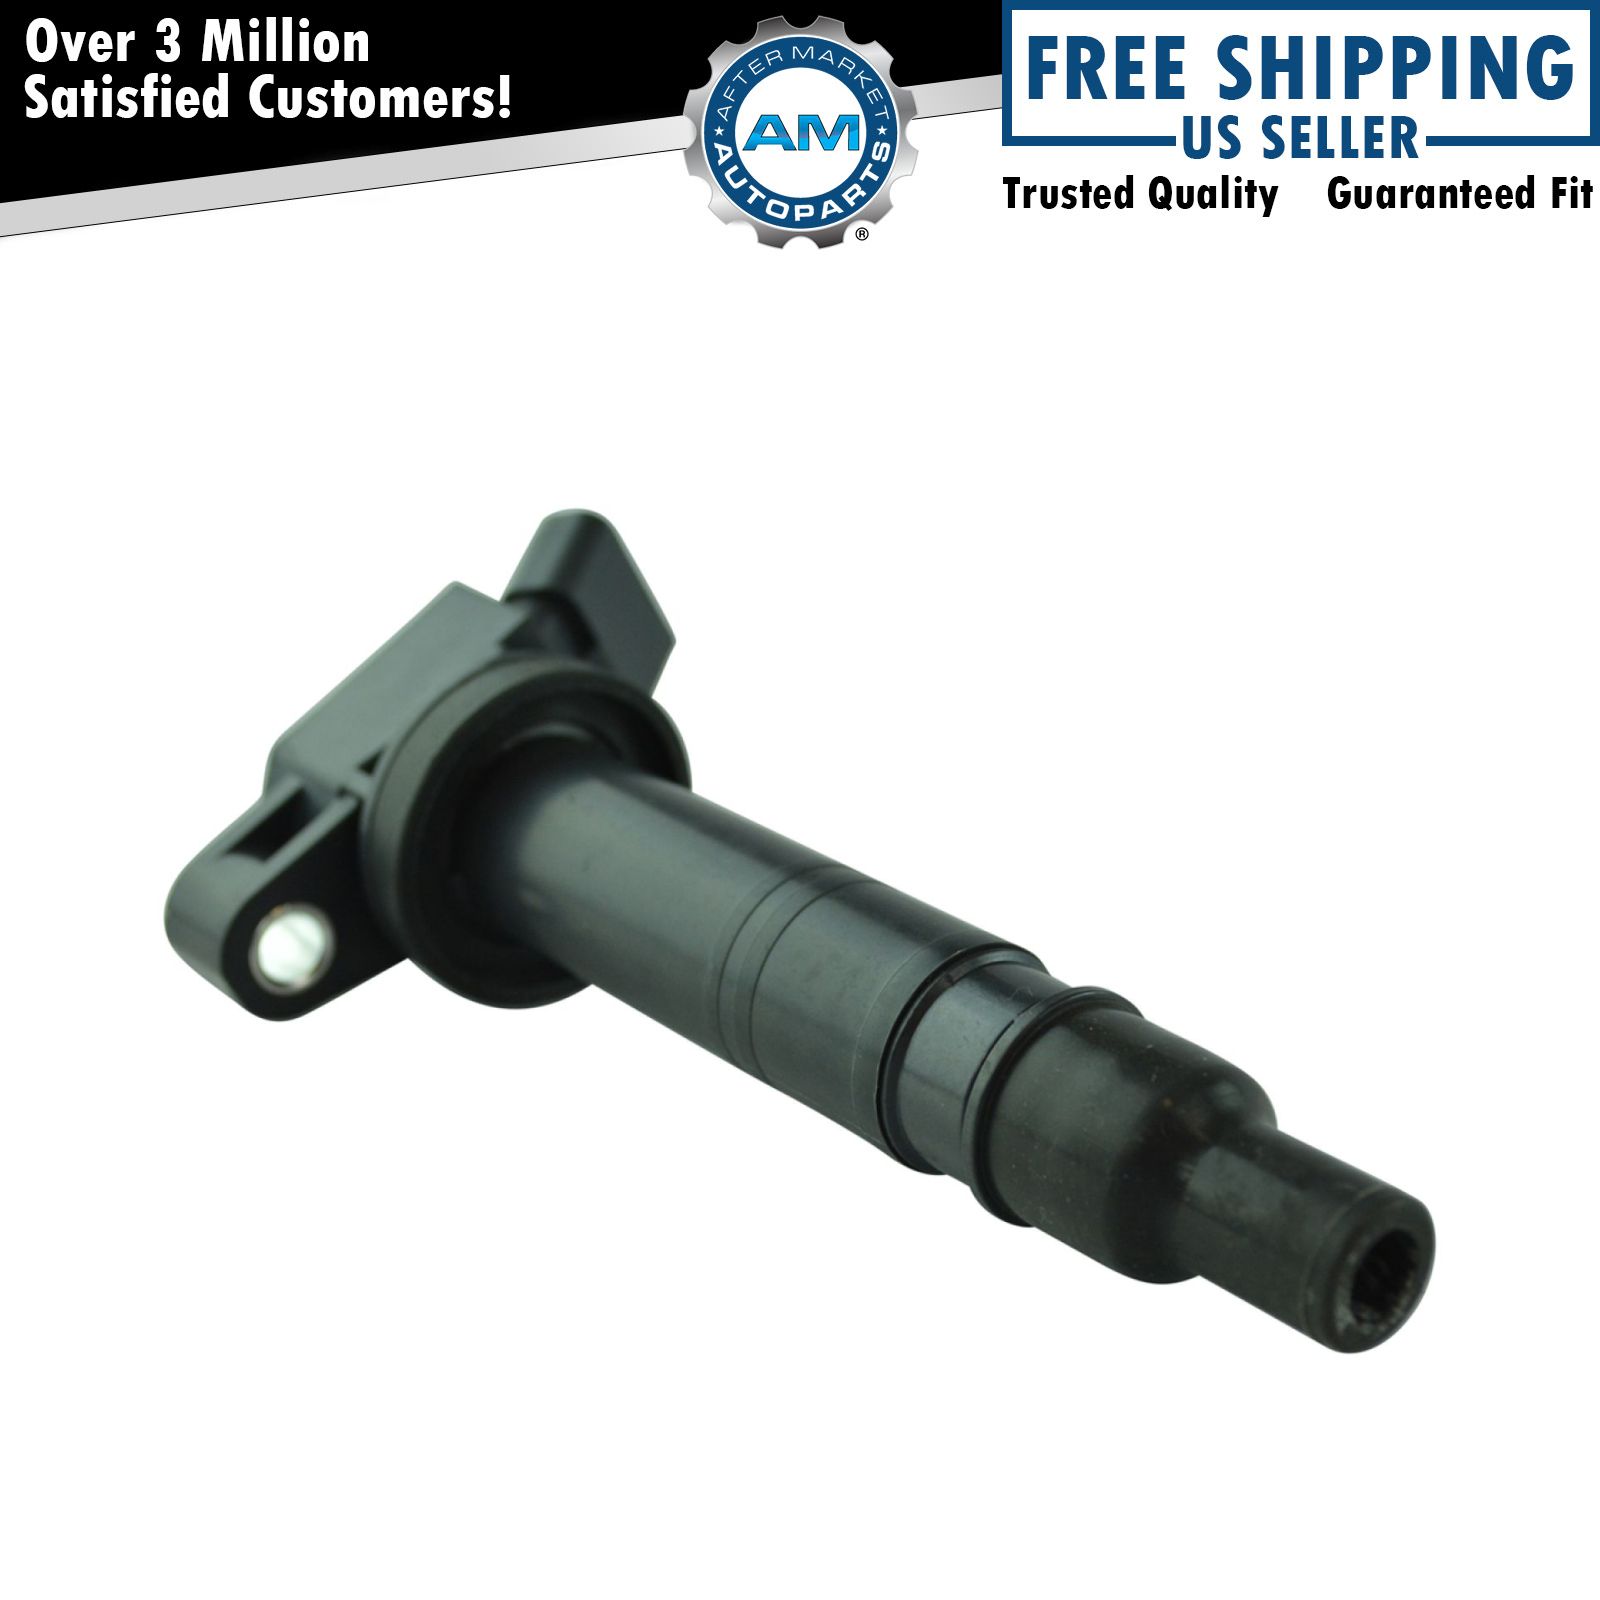 Delphi GN10323 Ignition Coil for Toyota 4Runner Camry Matrix Tacoma Tundra IS-F